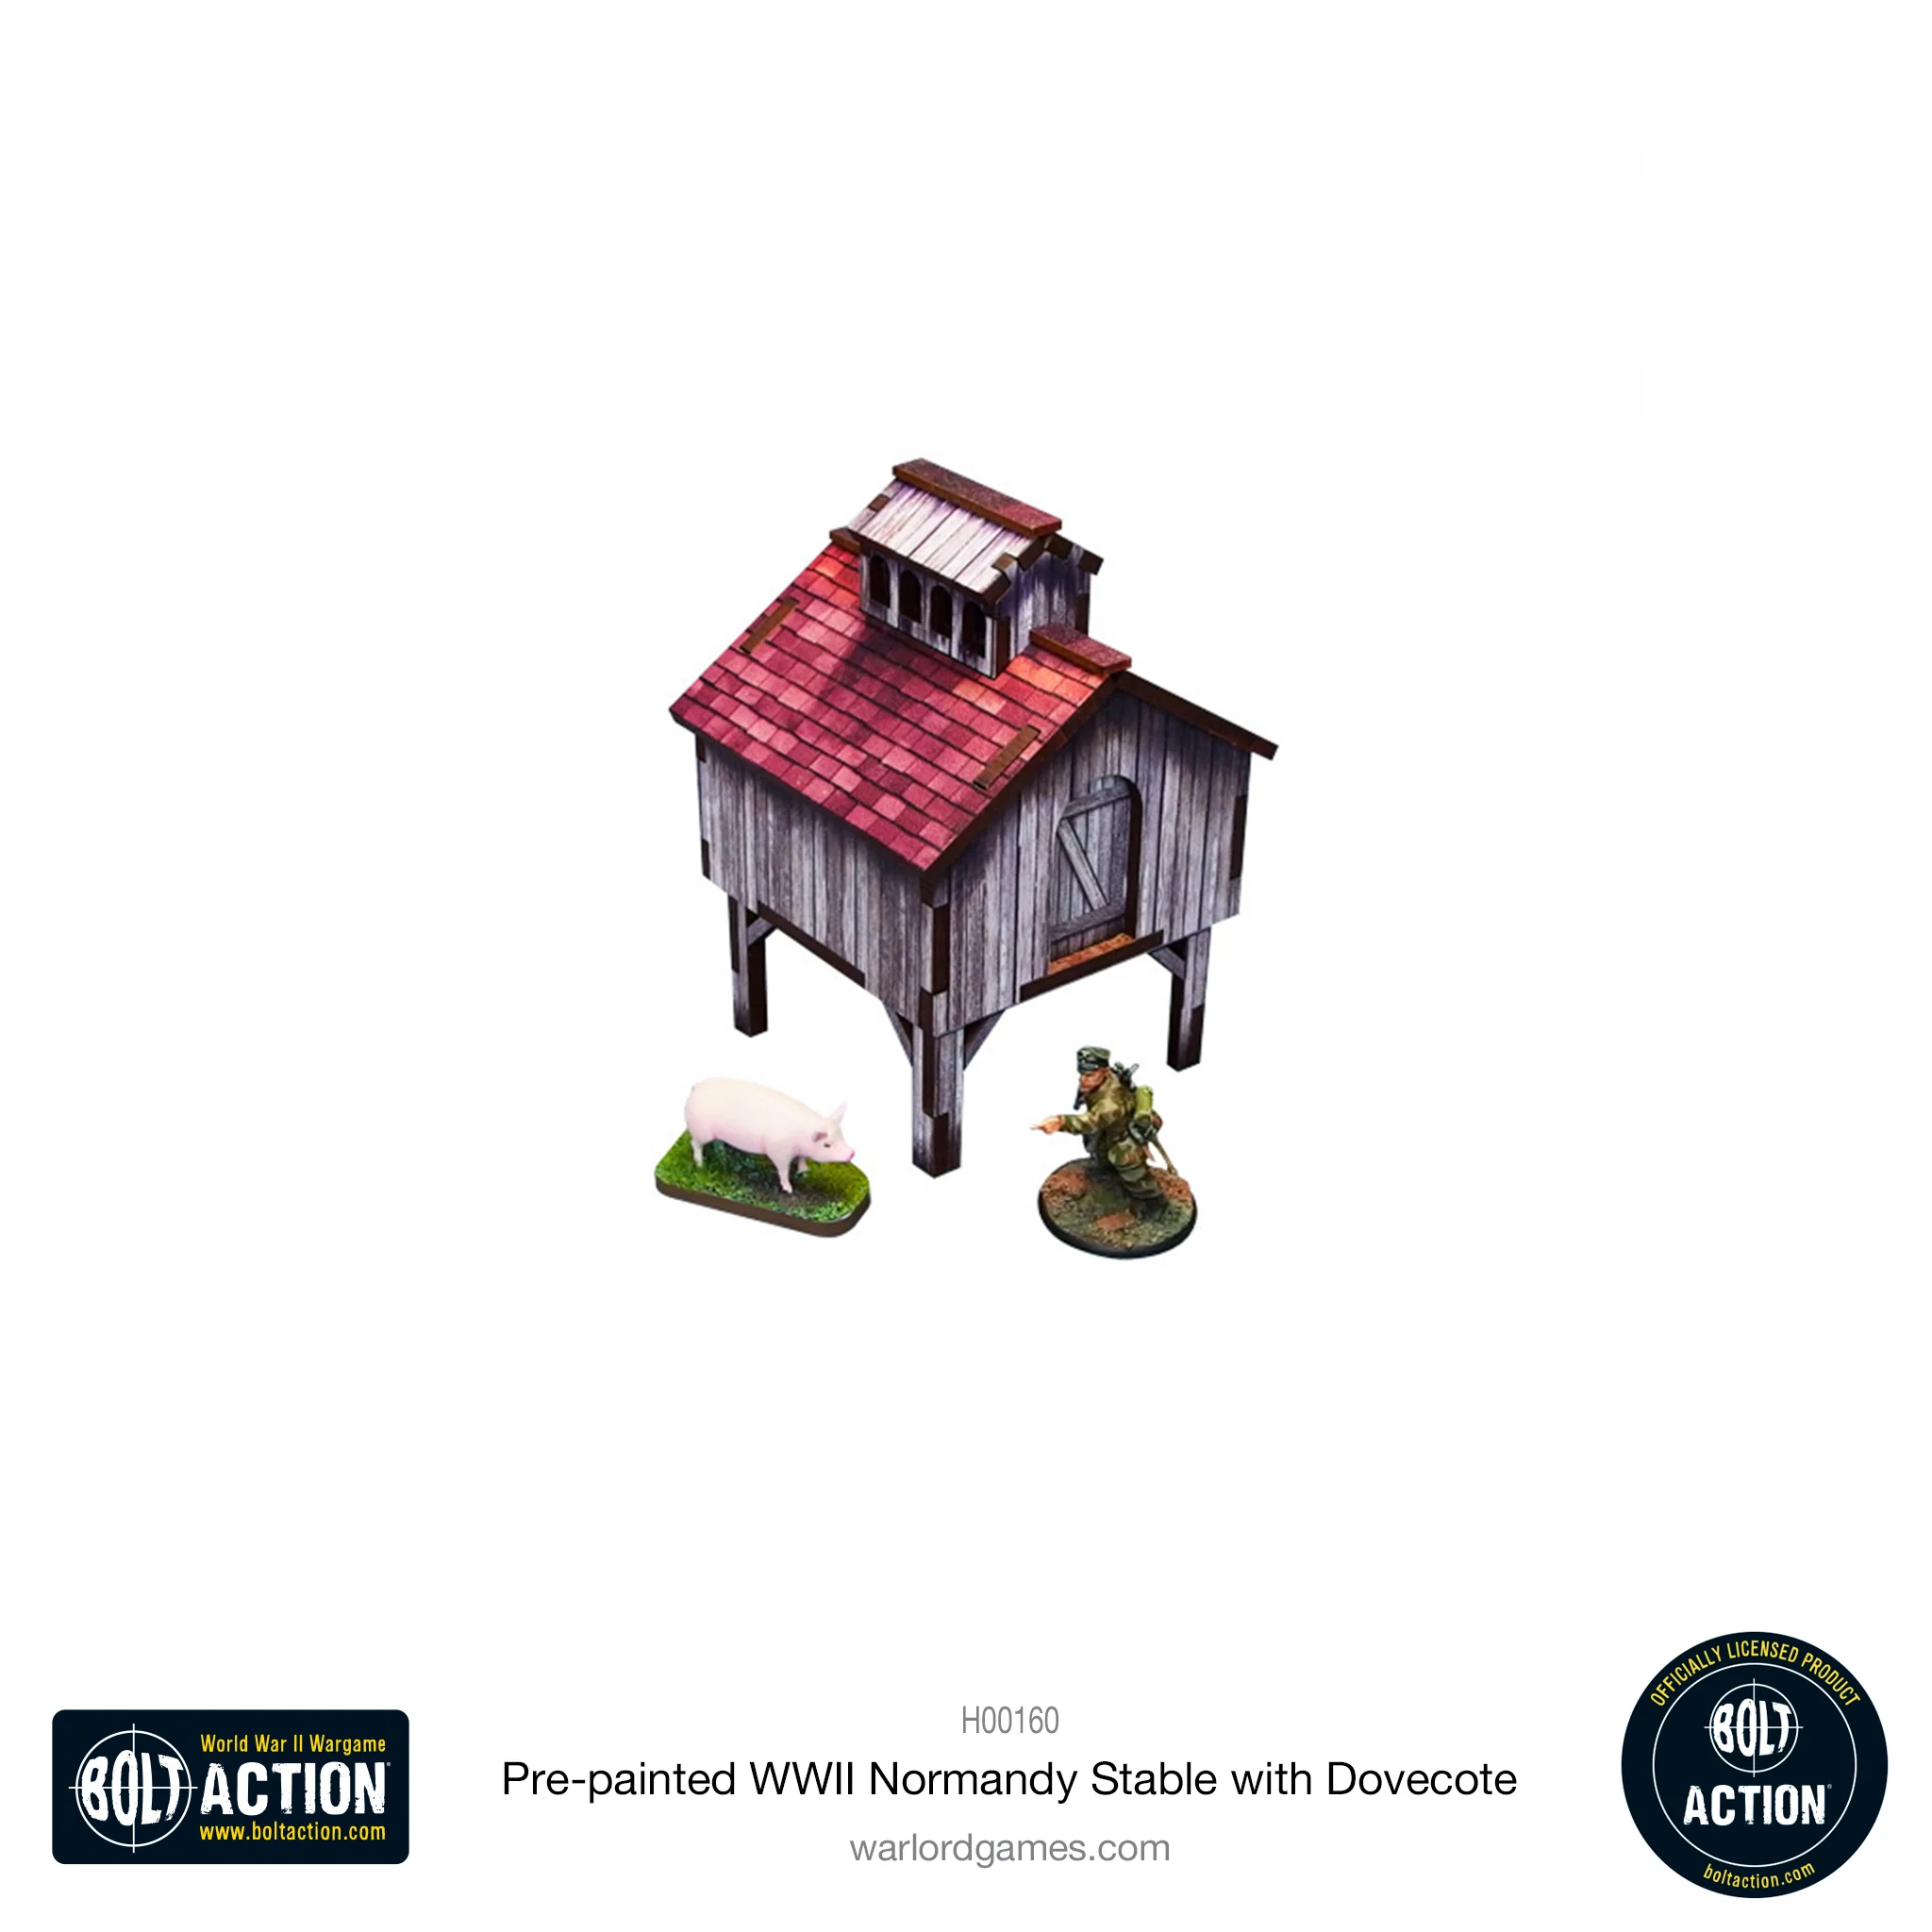 Bolt Action: Pre-Painted WWII Normandy Stable With Dovecote-1711116373-njfyg.webp